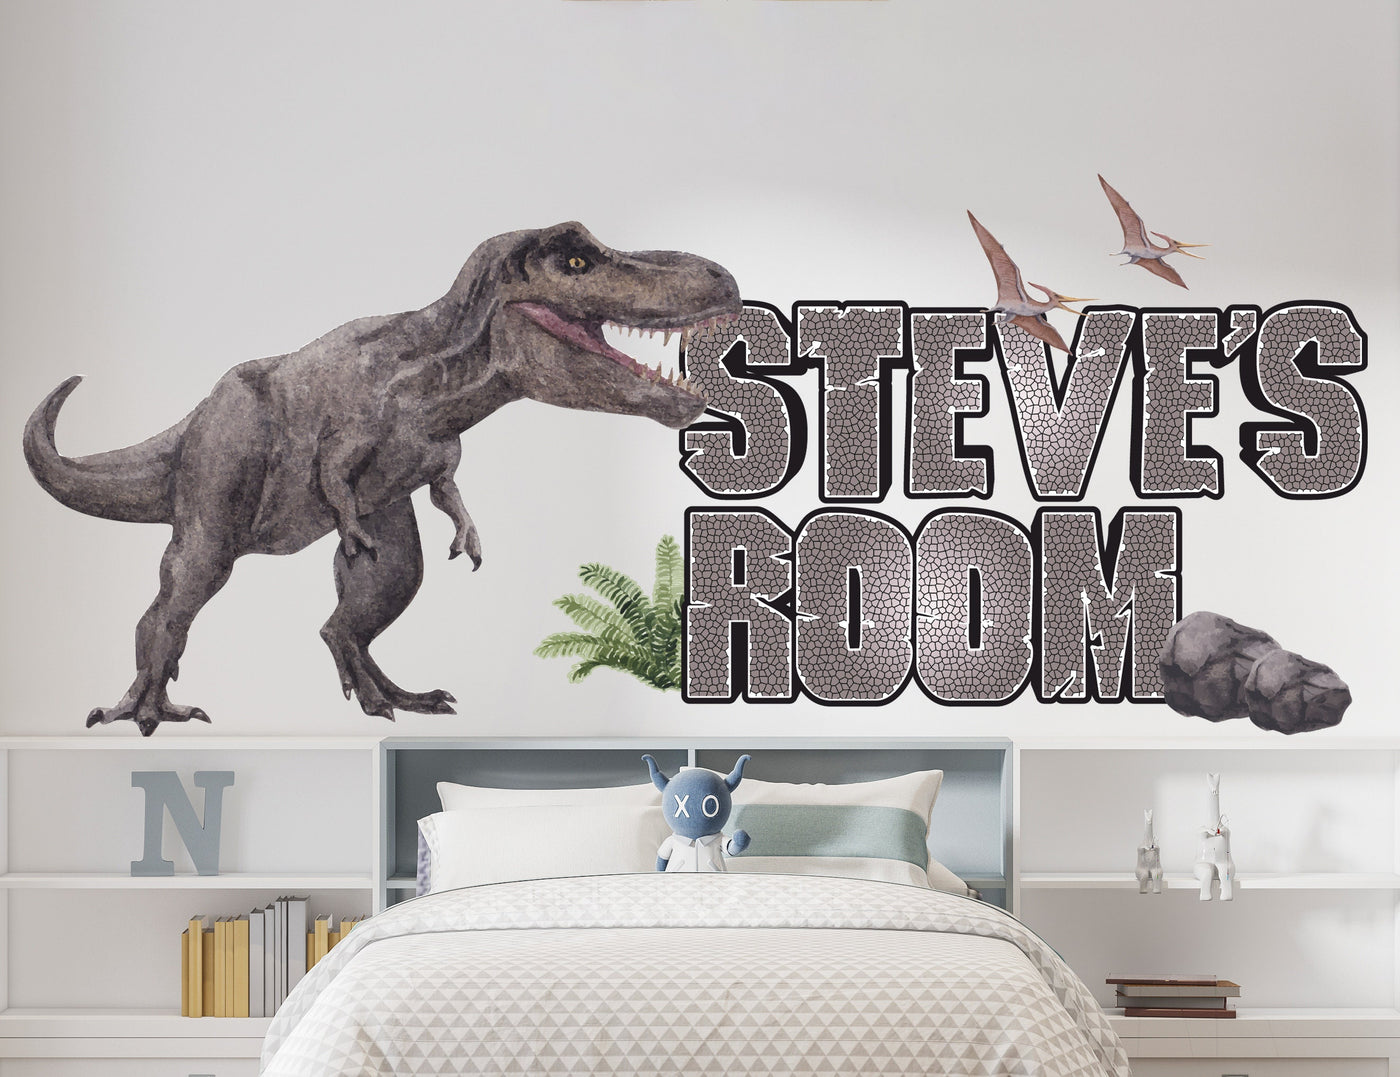 Dinosaur Wall Decal - T-Rex Name Decal - Kids Wall Art - Wall Decals for Boys Bedroom Vinyl Removable - Dinosaurs Modern Wall Art